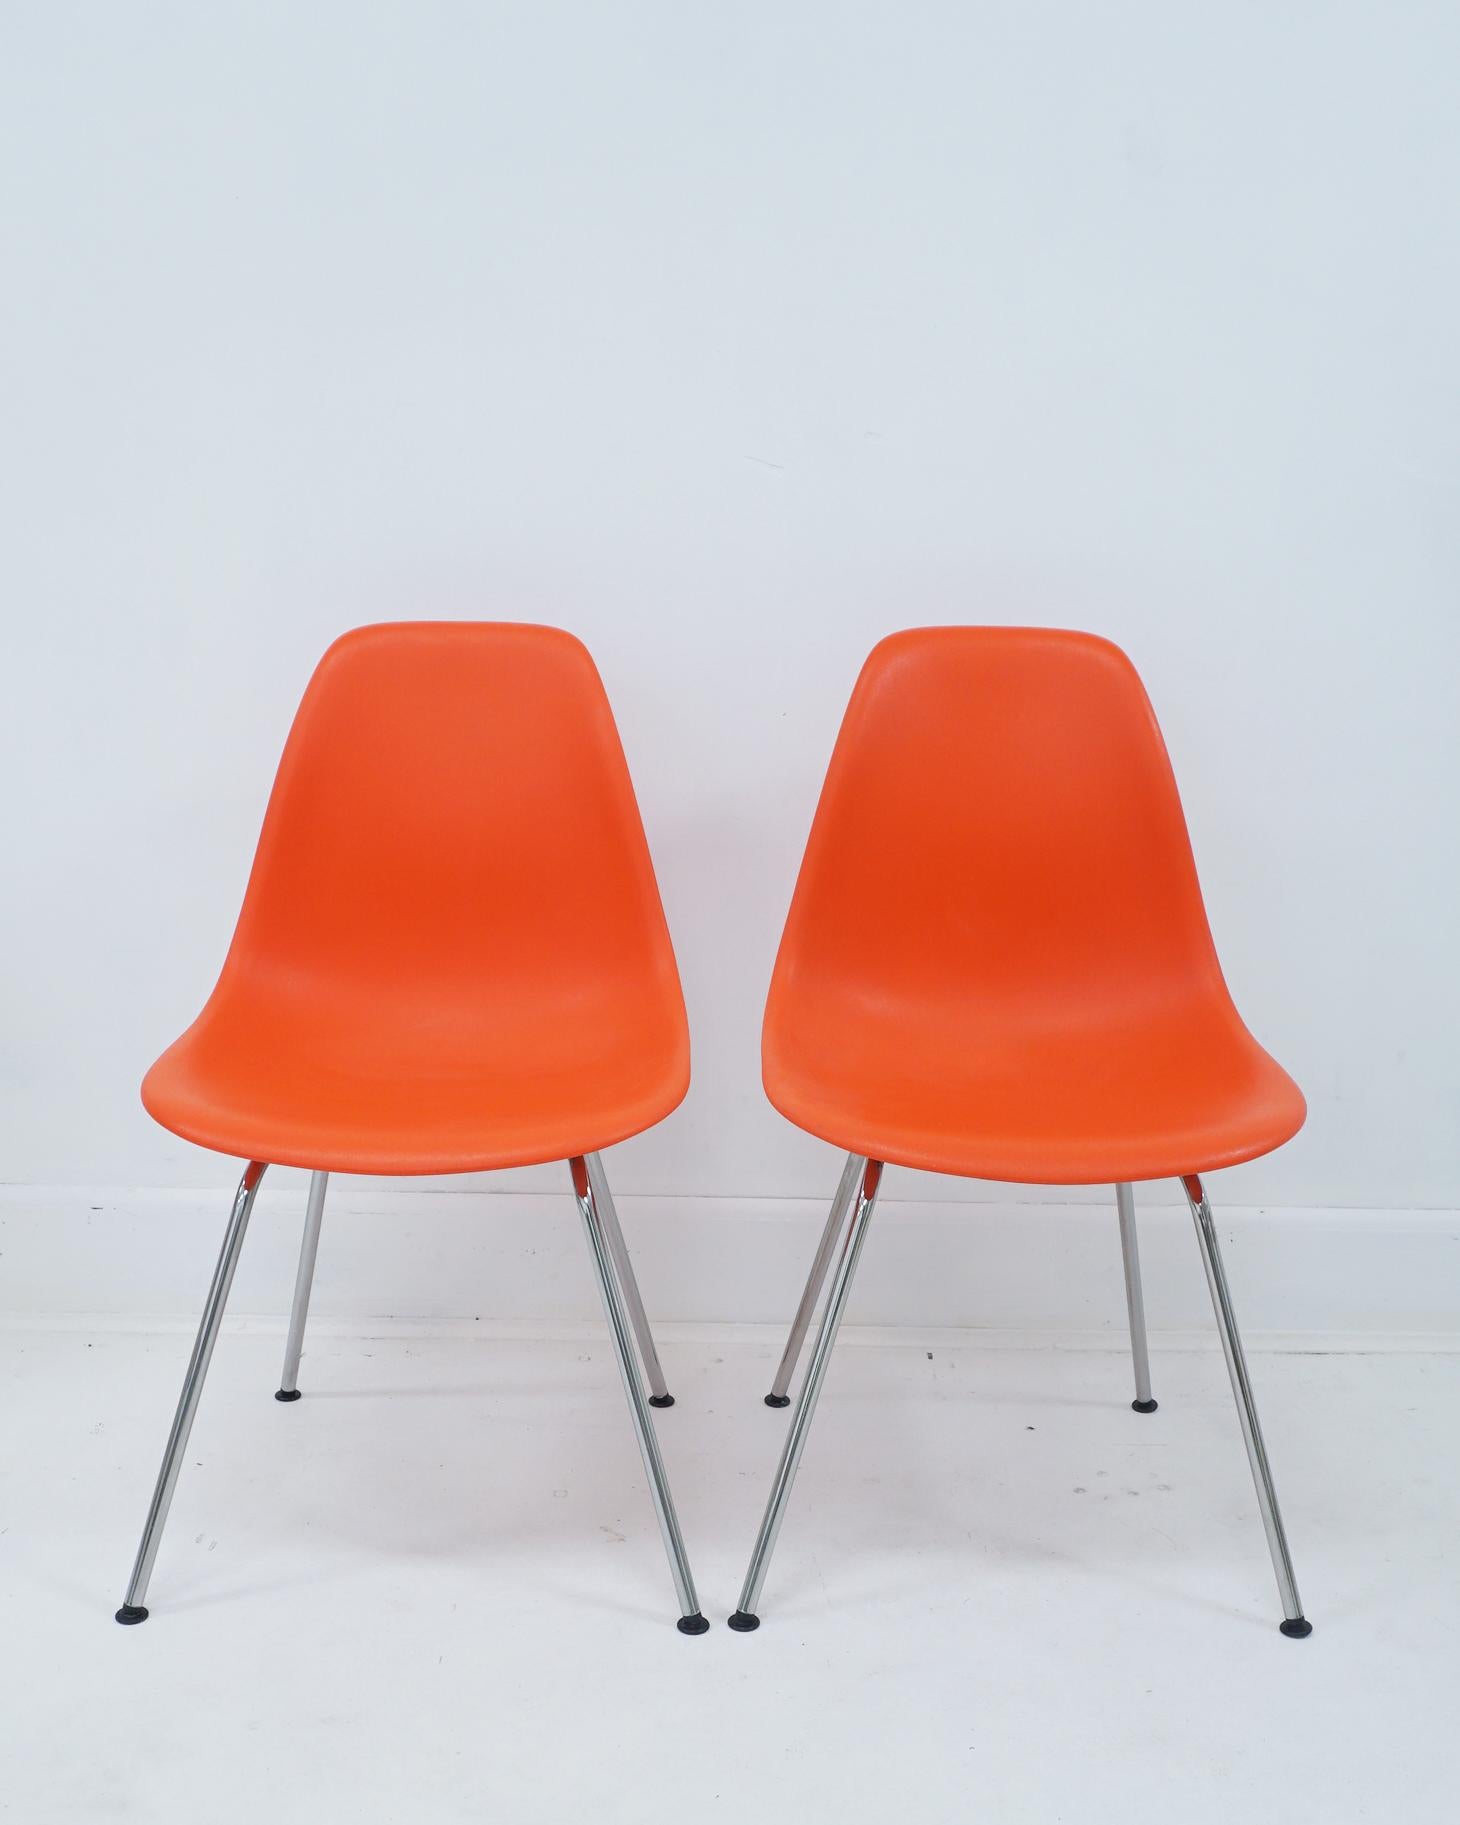 Contemporary Eames Orange Red Molded Plastic Side Chair (Postmoderne) im Angebot